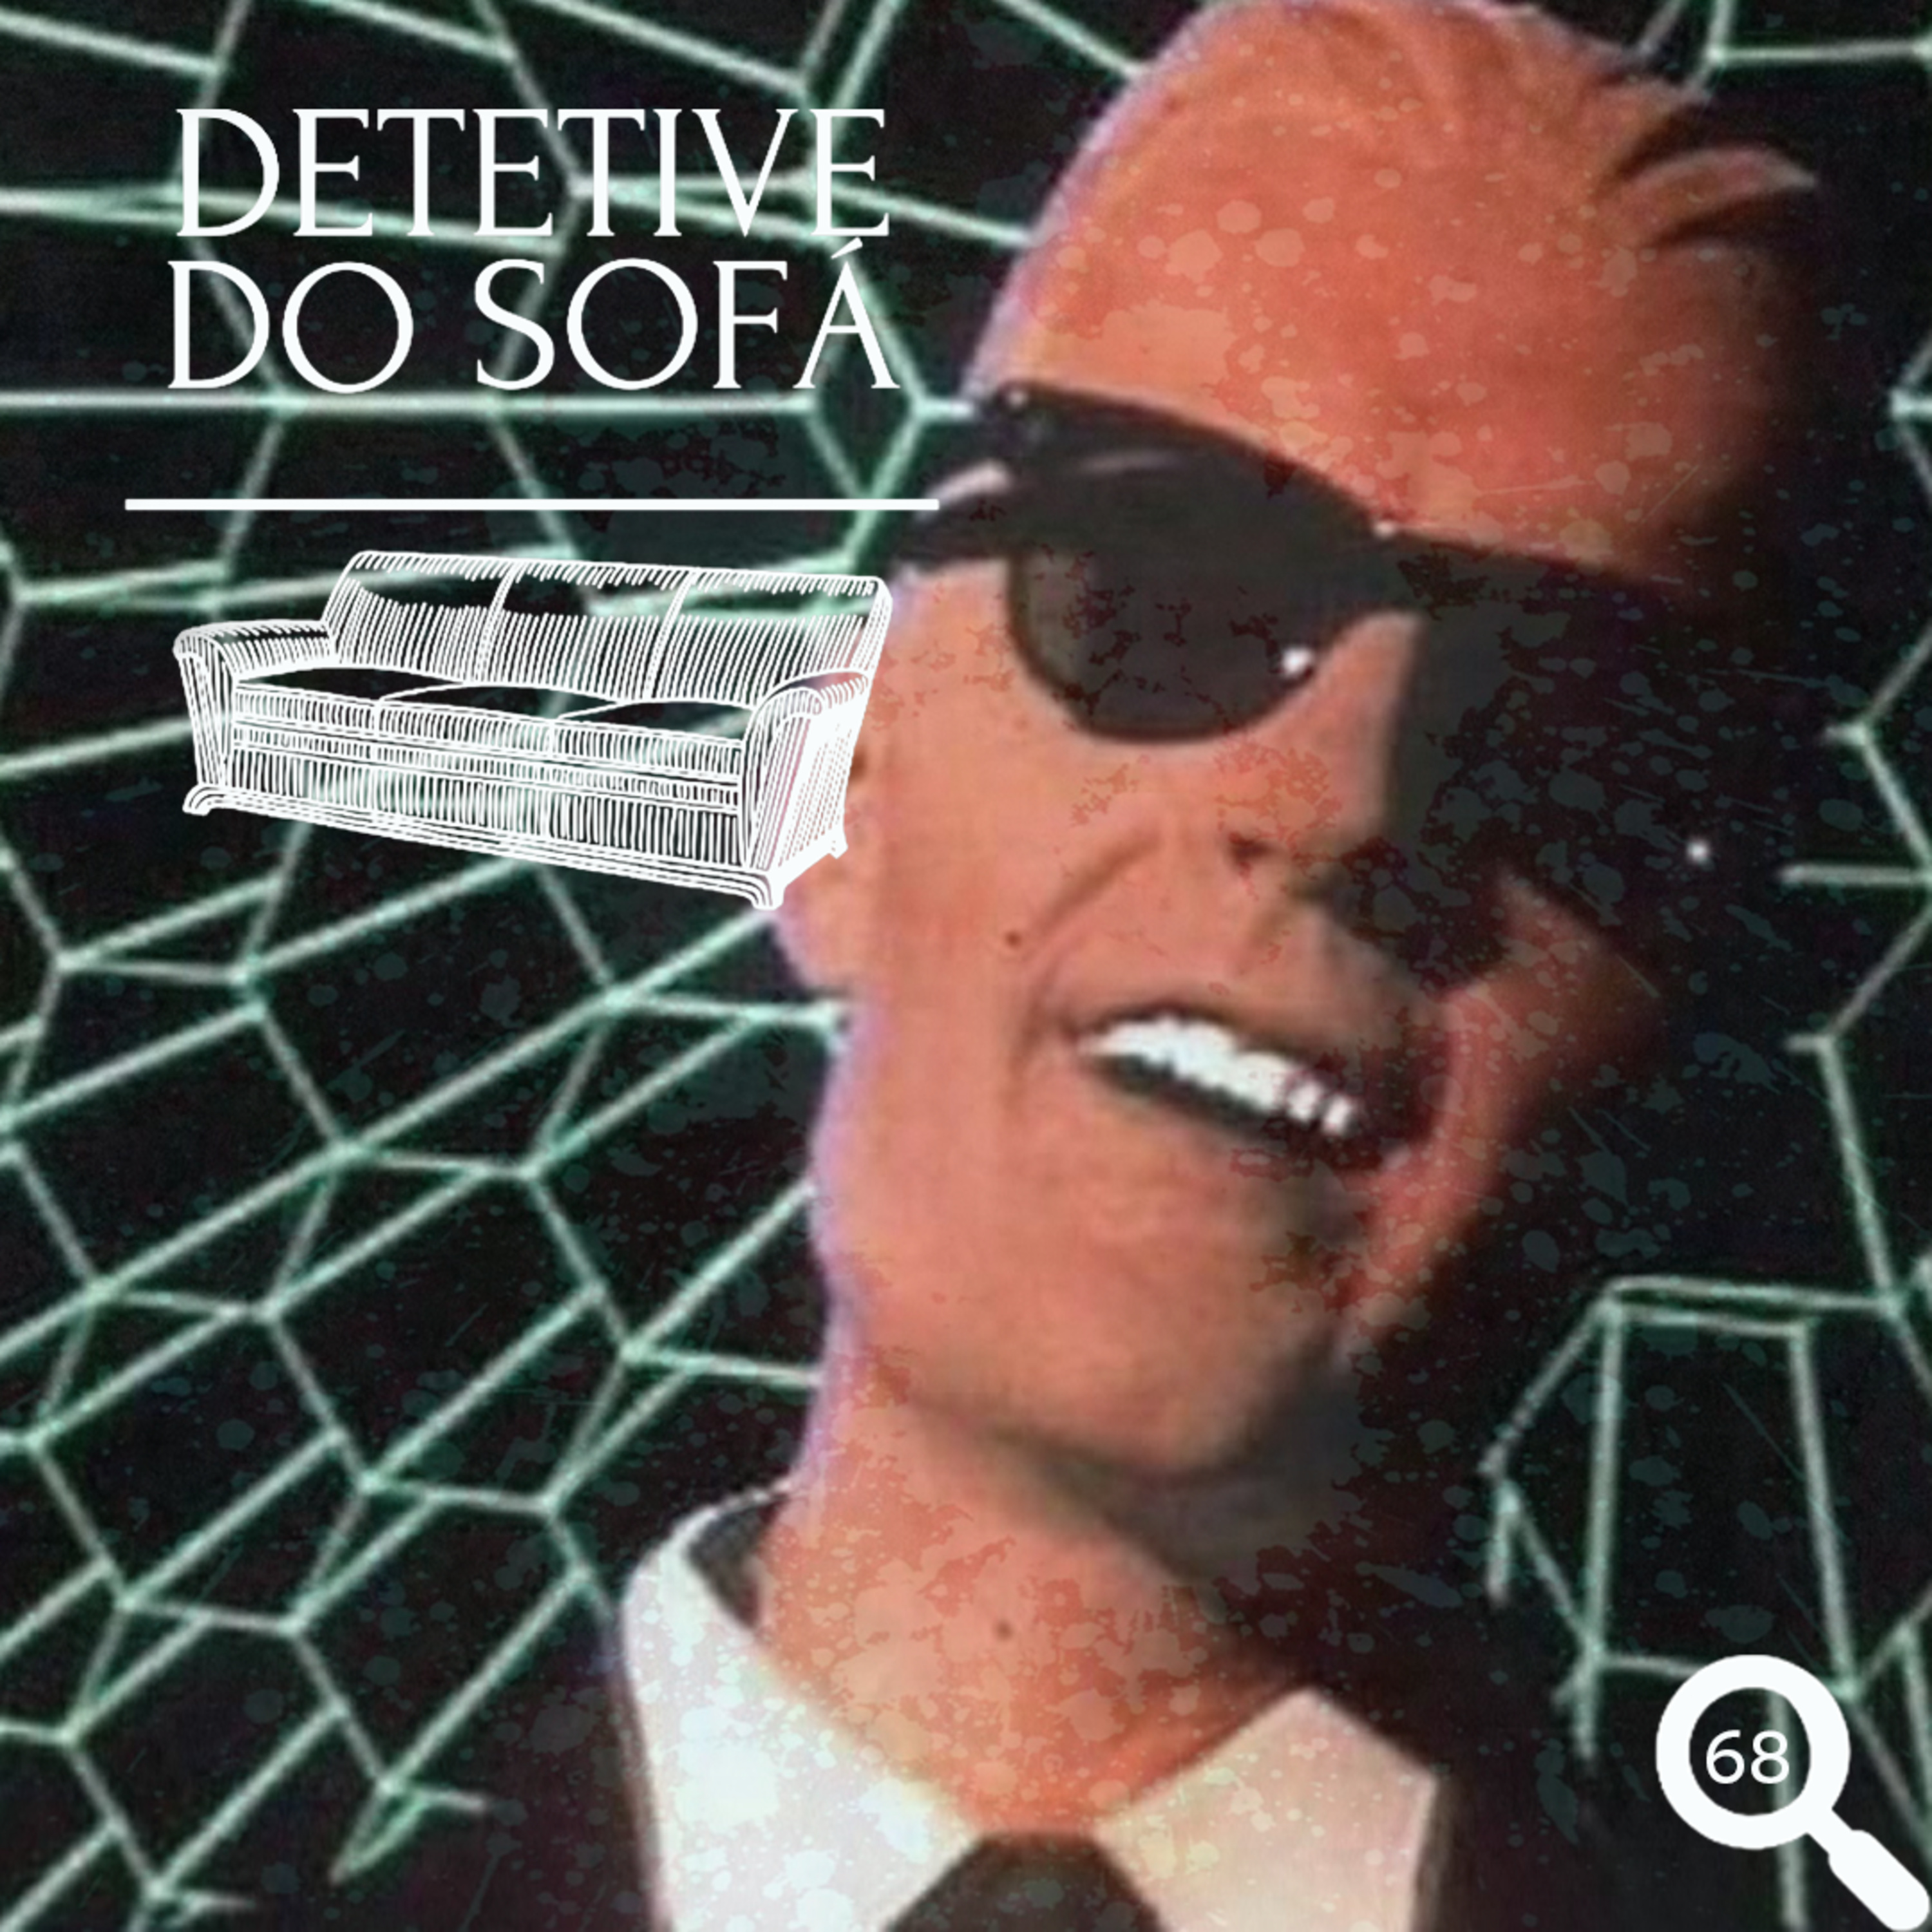 You are currently viewing 68 – Max Headroom: sequestro do sinal de TV